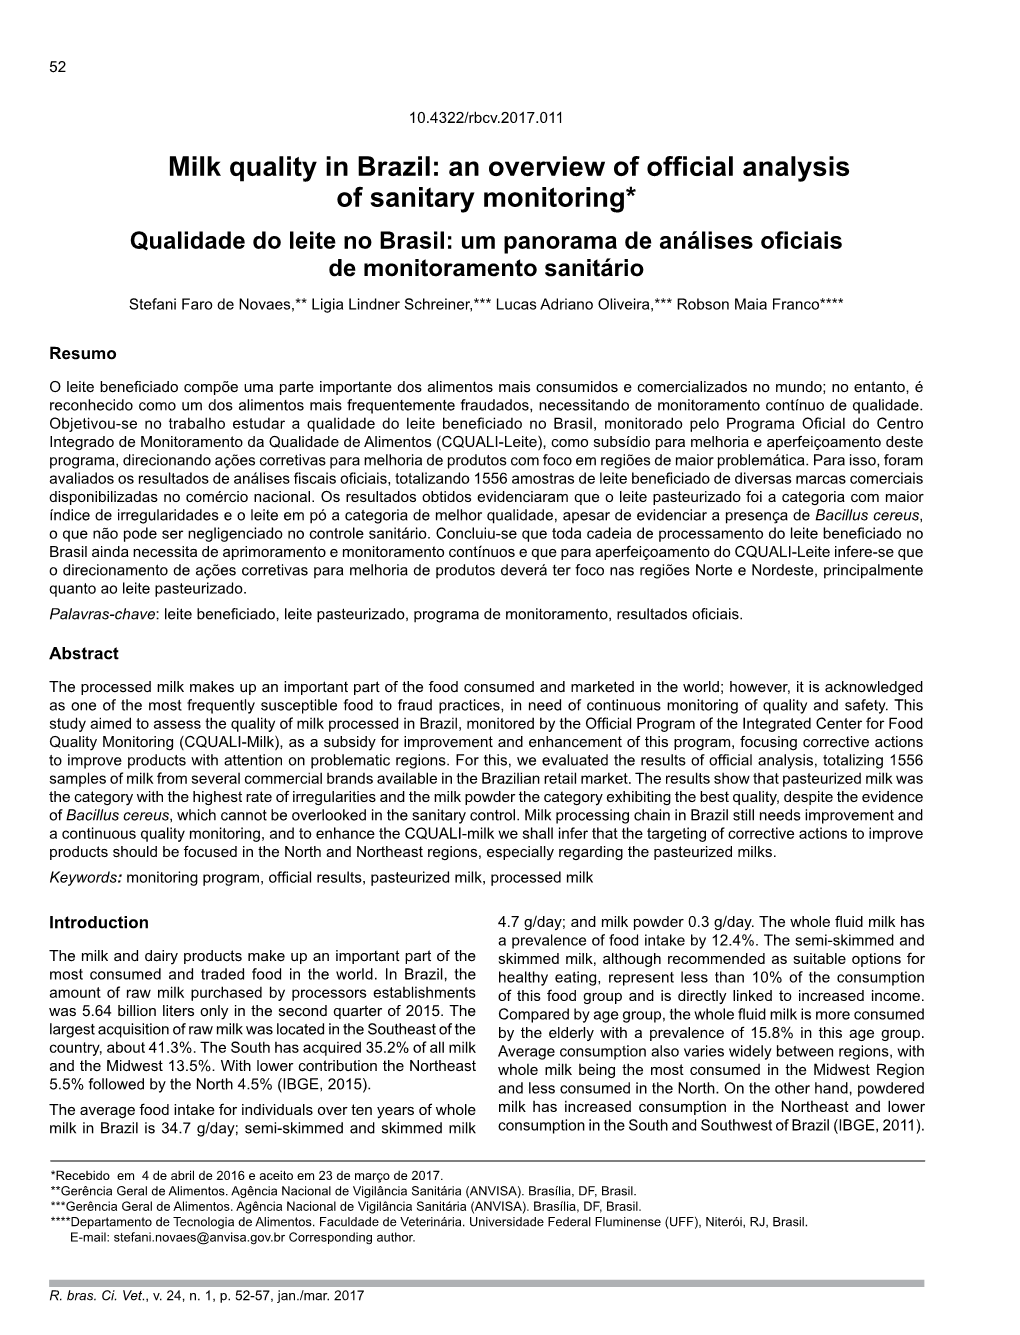 Milk Quality in Brazil: an Overview of Official Analysis of Sanitary Monitoring